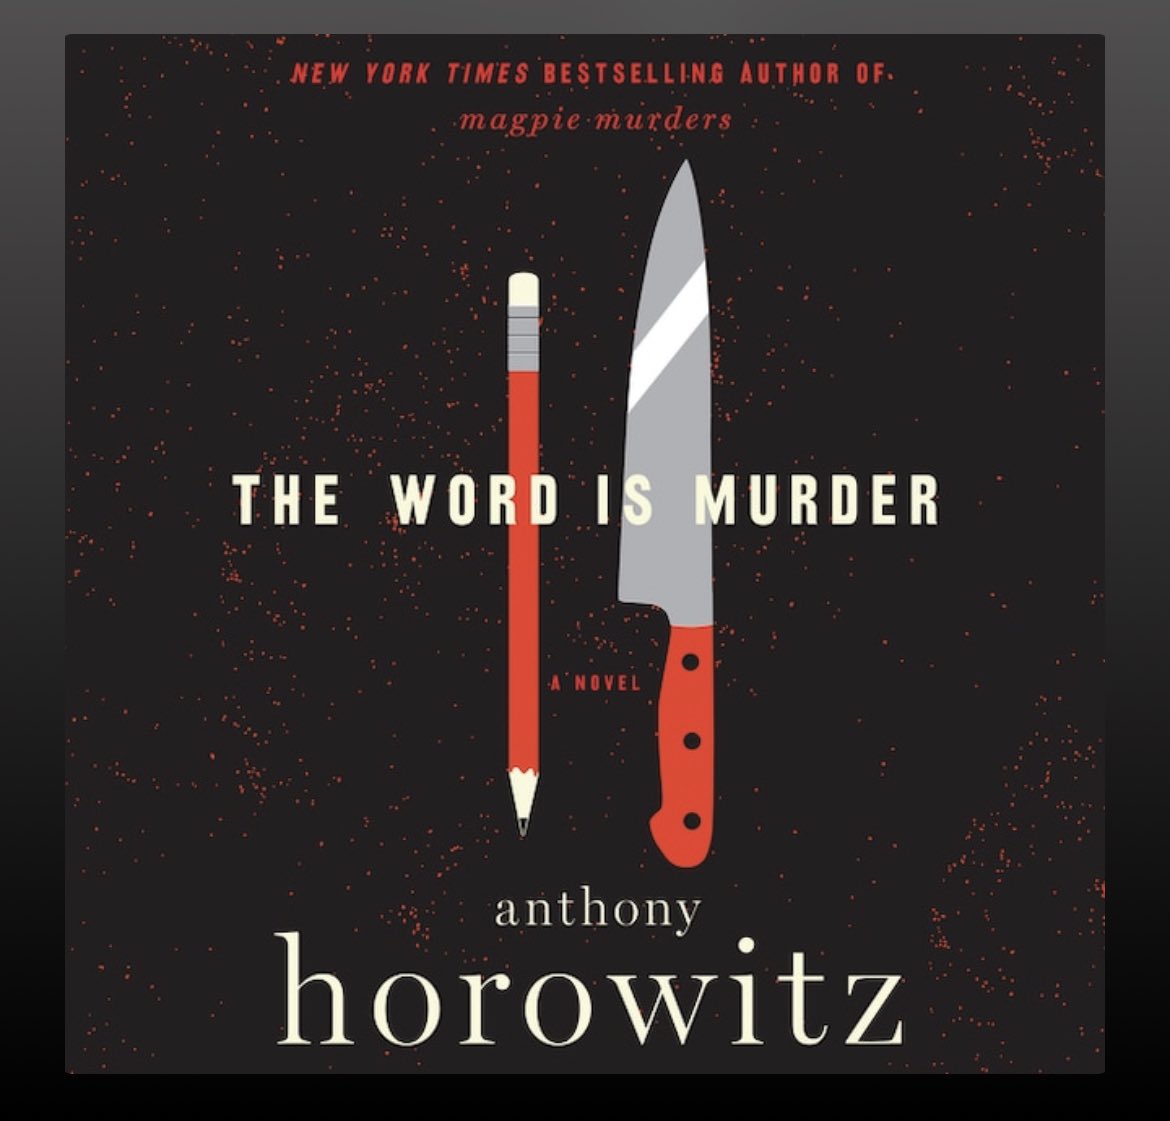 5/5 a brilliant #book by @AnthonyHorowitz . Just wow! 
In my mind, I see Hawthorne played by Philip Glenister ( @PhilipGNews ). I don’t know why, it just feel right. 

#AnthonyHorowitz #Hawthorne #theWordisMurder #BookClub